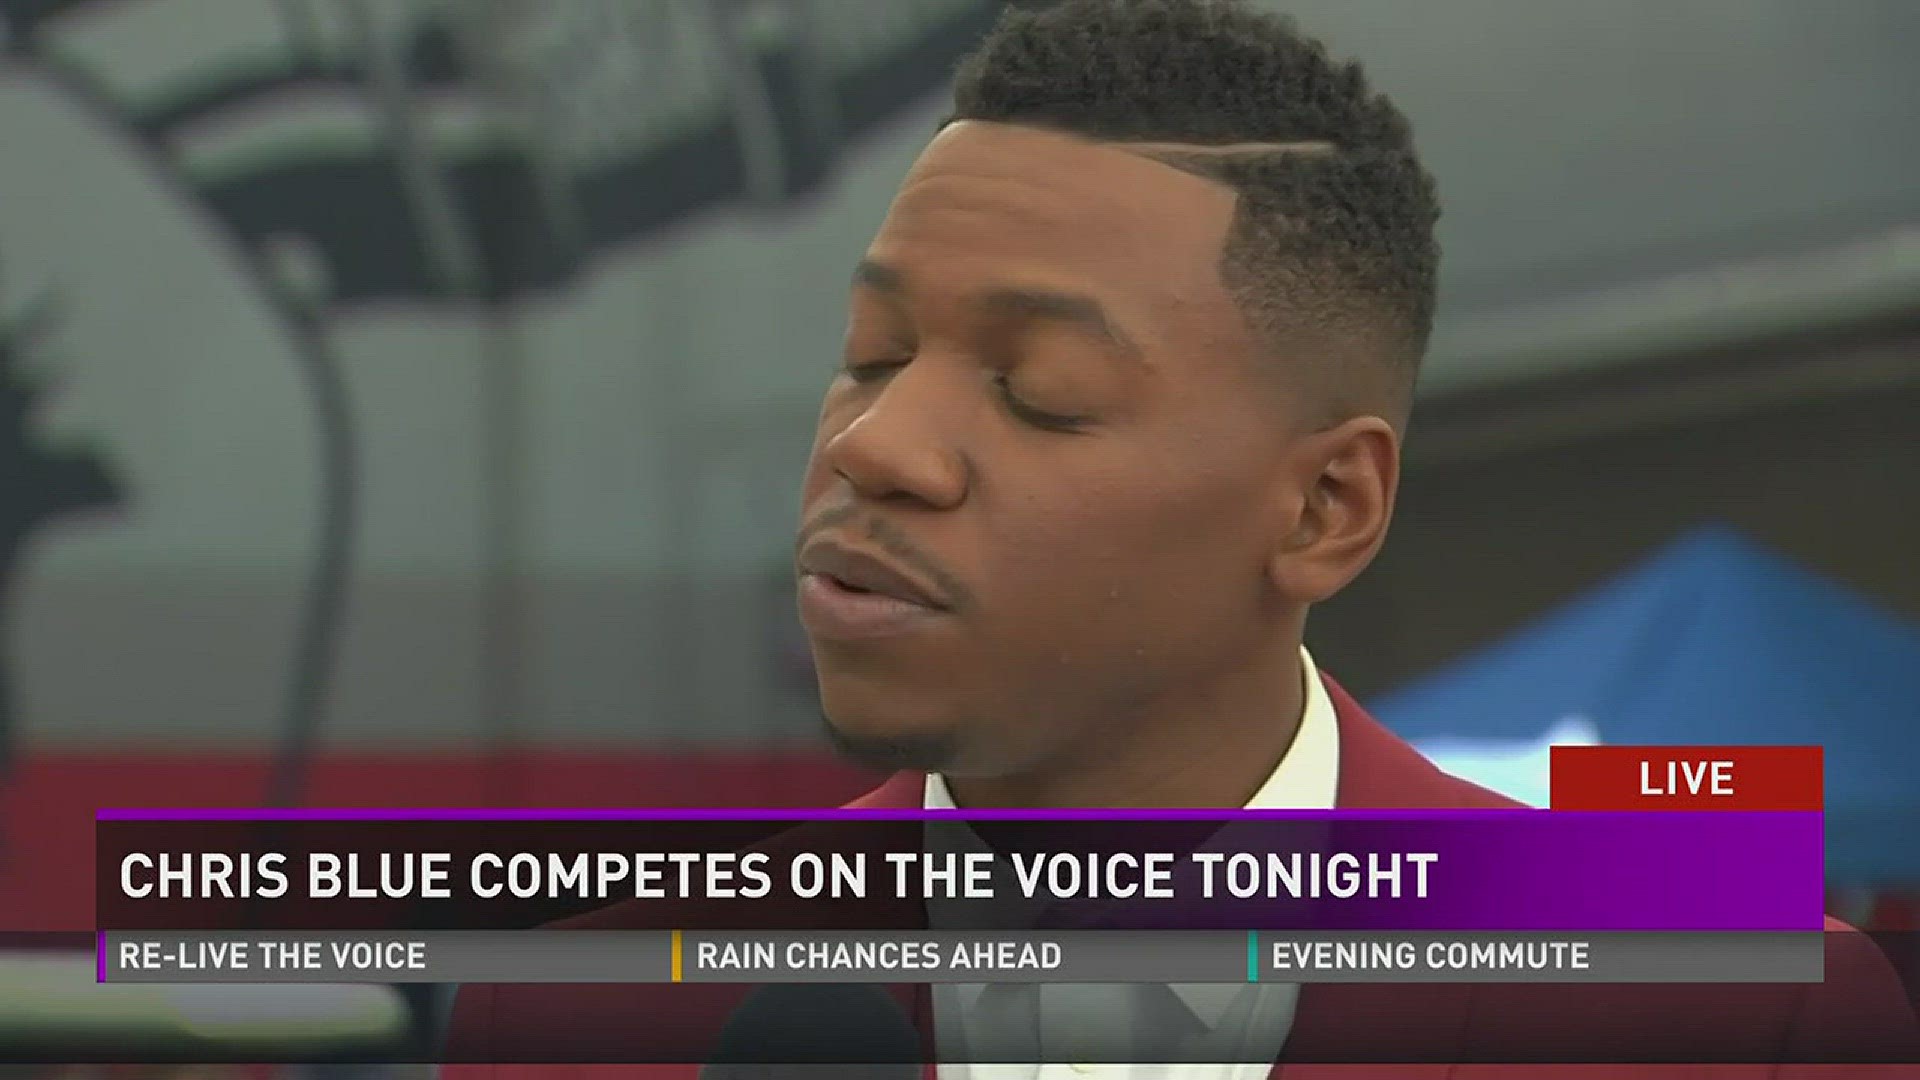 Ahead of his Top 11 performance on The Voice, Knoxville's Chris Blue revealed how he and his coach wanted to pull out the emotion this week. (5/1/17)